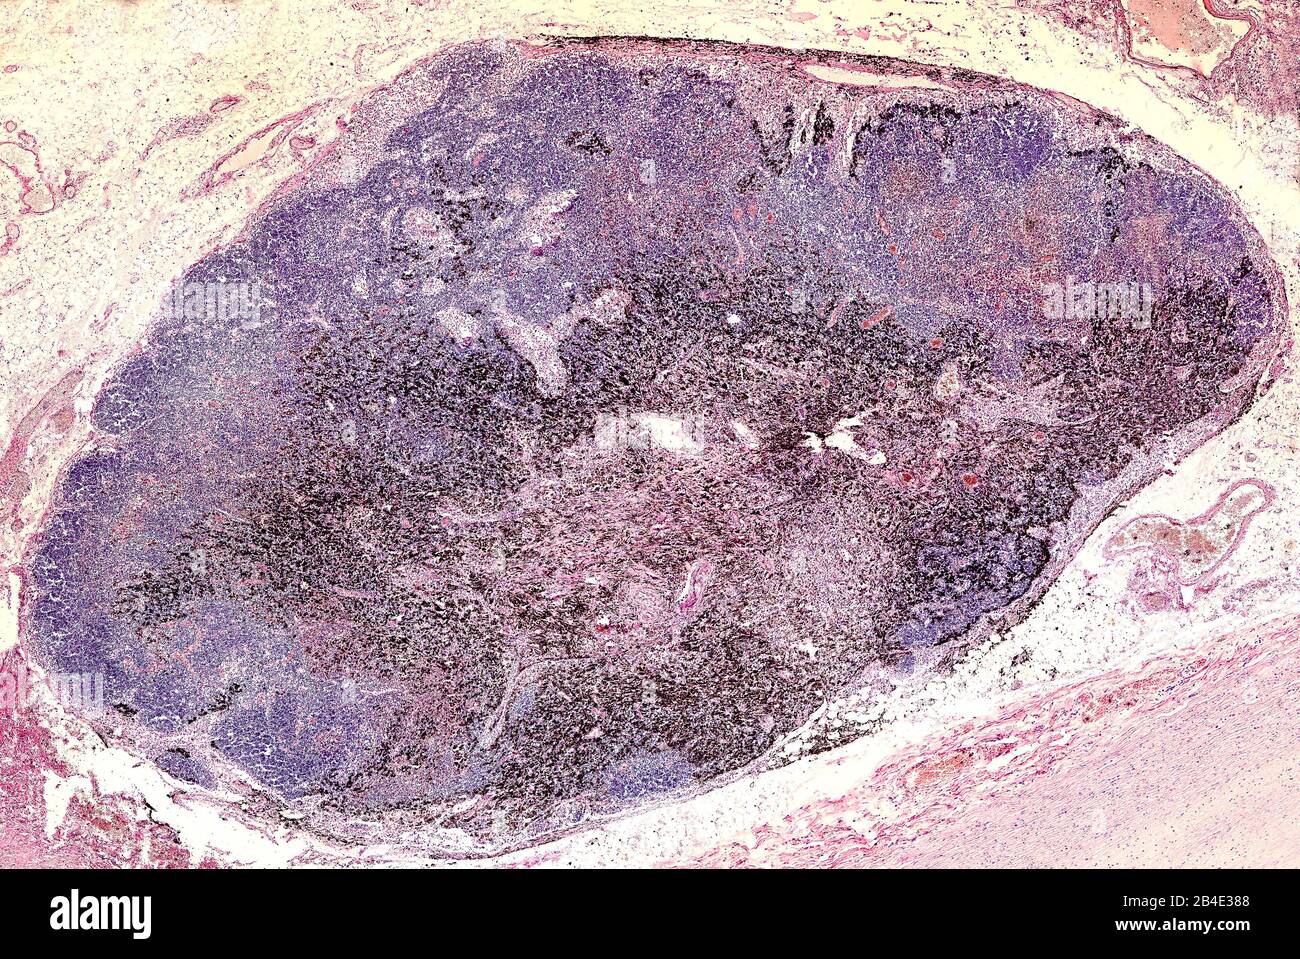 Anthracotic lymph node. Accumulation of carbon is most commonly found in intrapulmonary lymph nodes, due to coal dust, smoke or pollution.  Hematoxyli Stock Photo